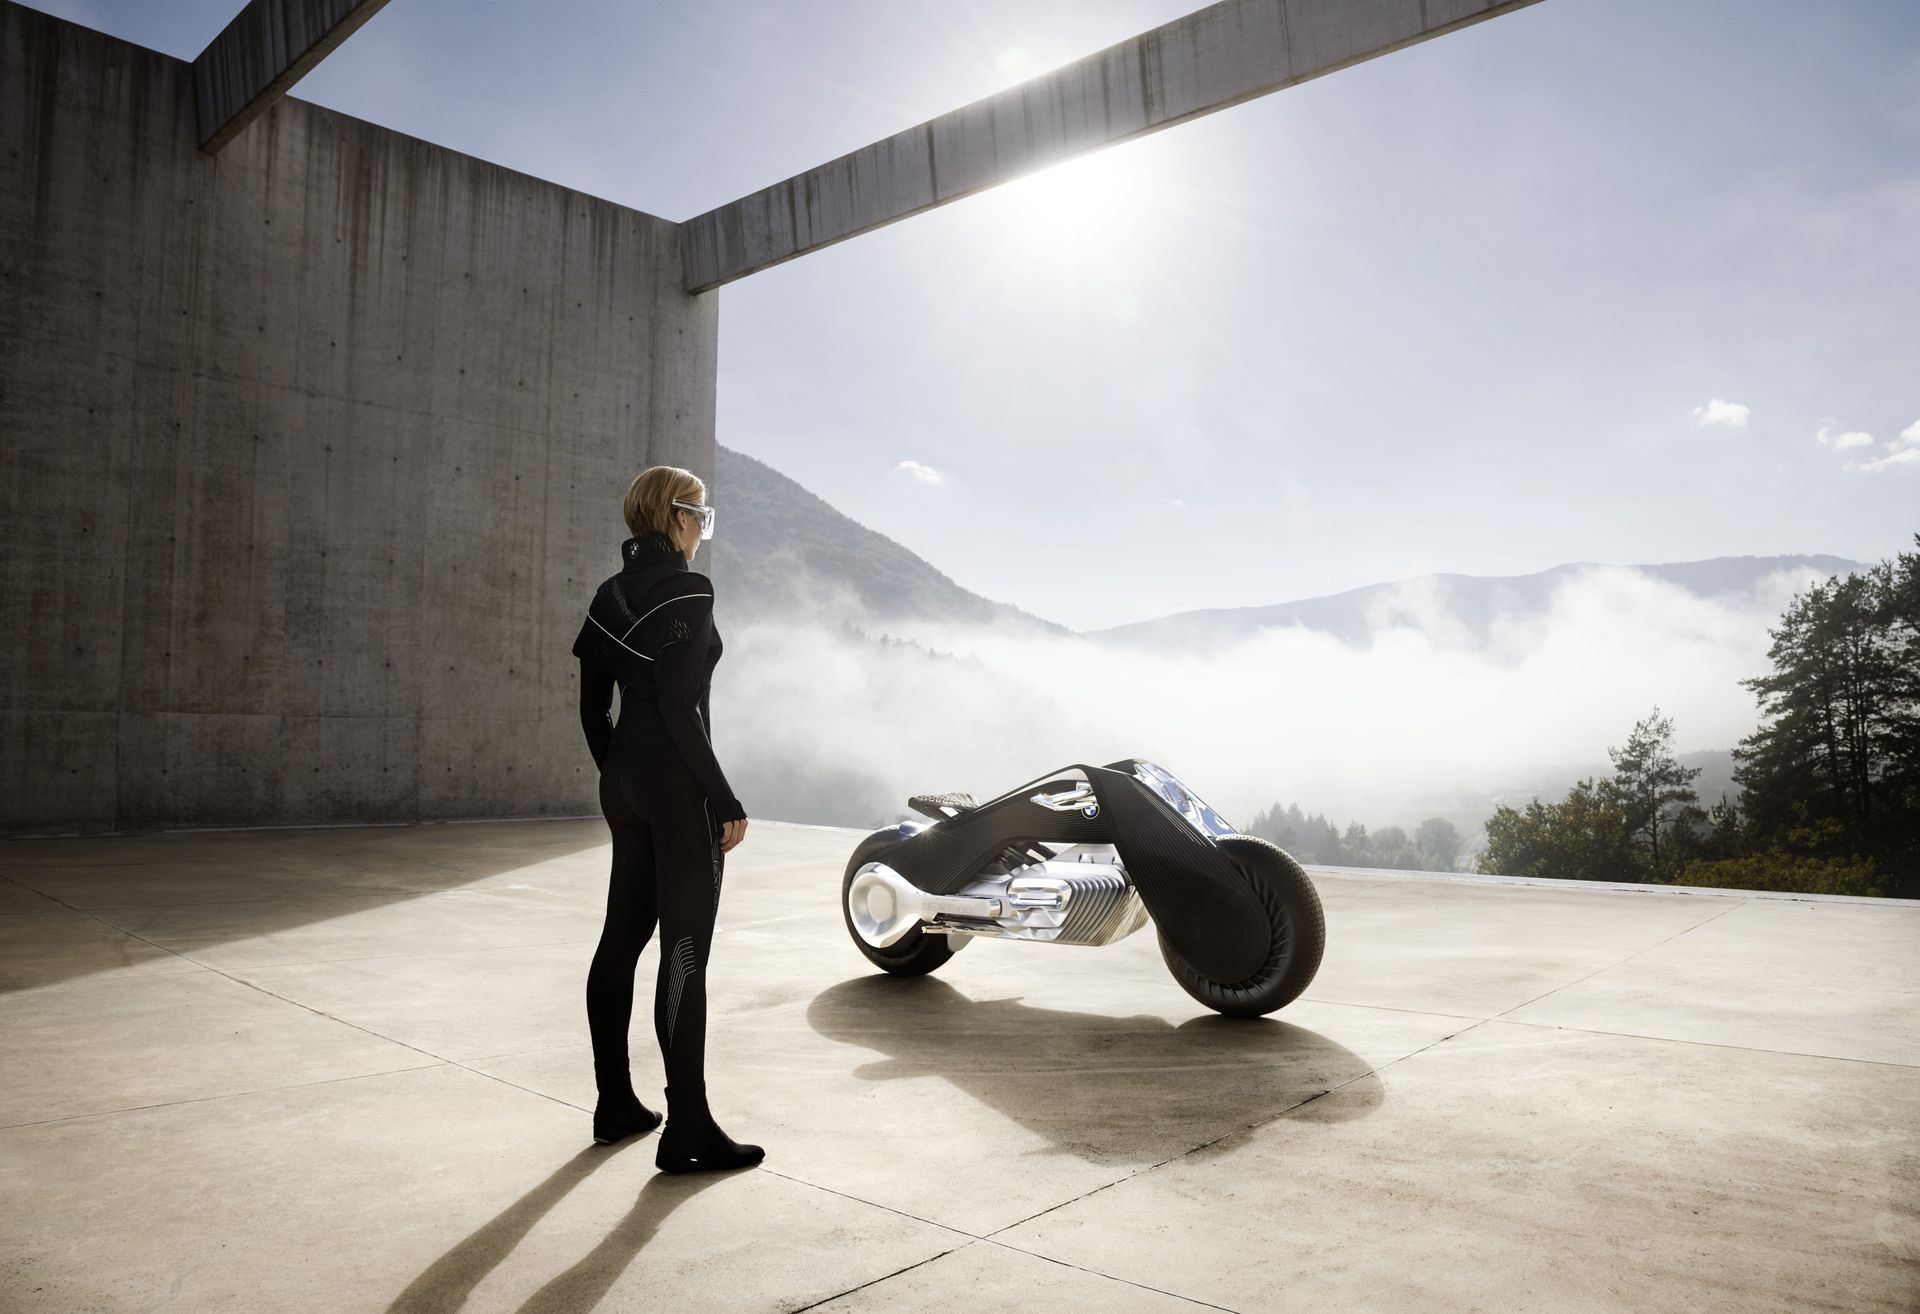 The BMW Motorrad Vision Next 100, the flexible motorcycle of the future